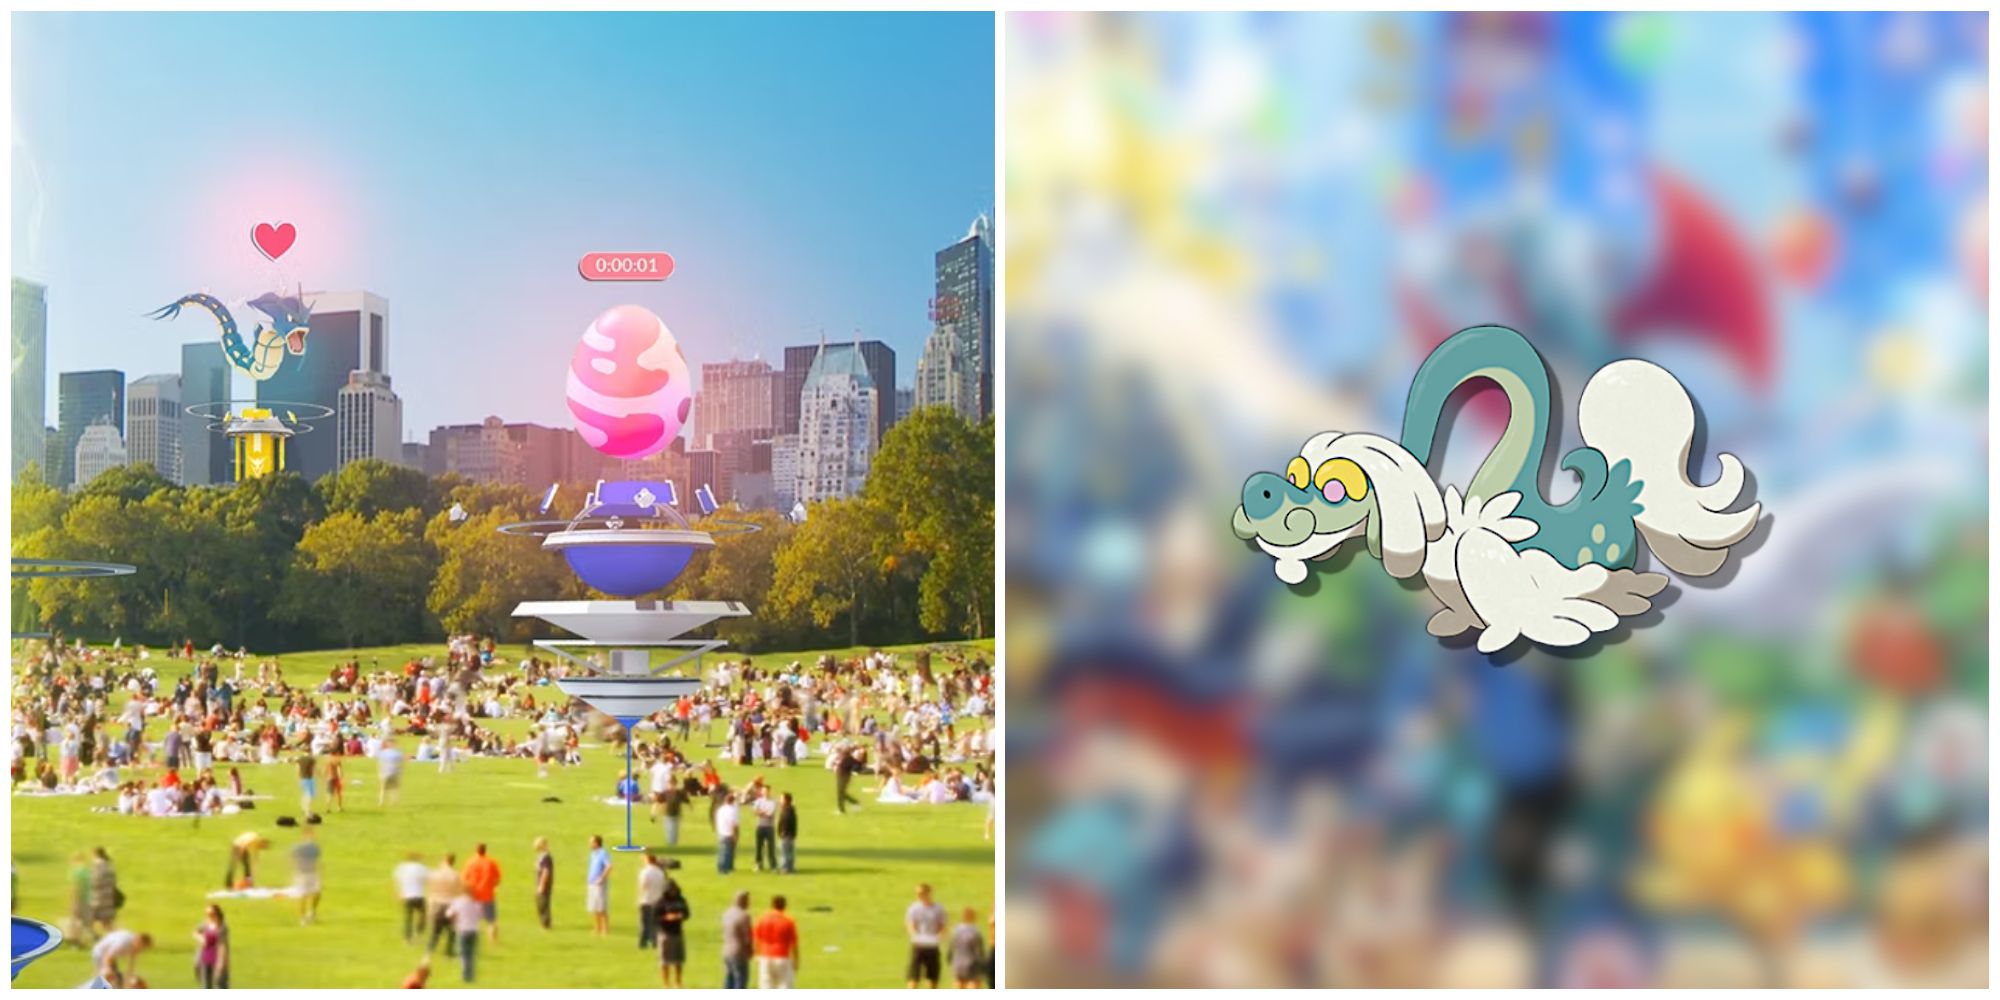 Split image of some Gyms and the Pokemon Drampa from Pokemon GO